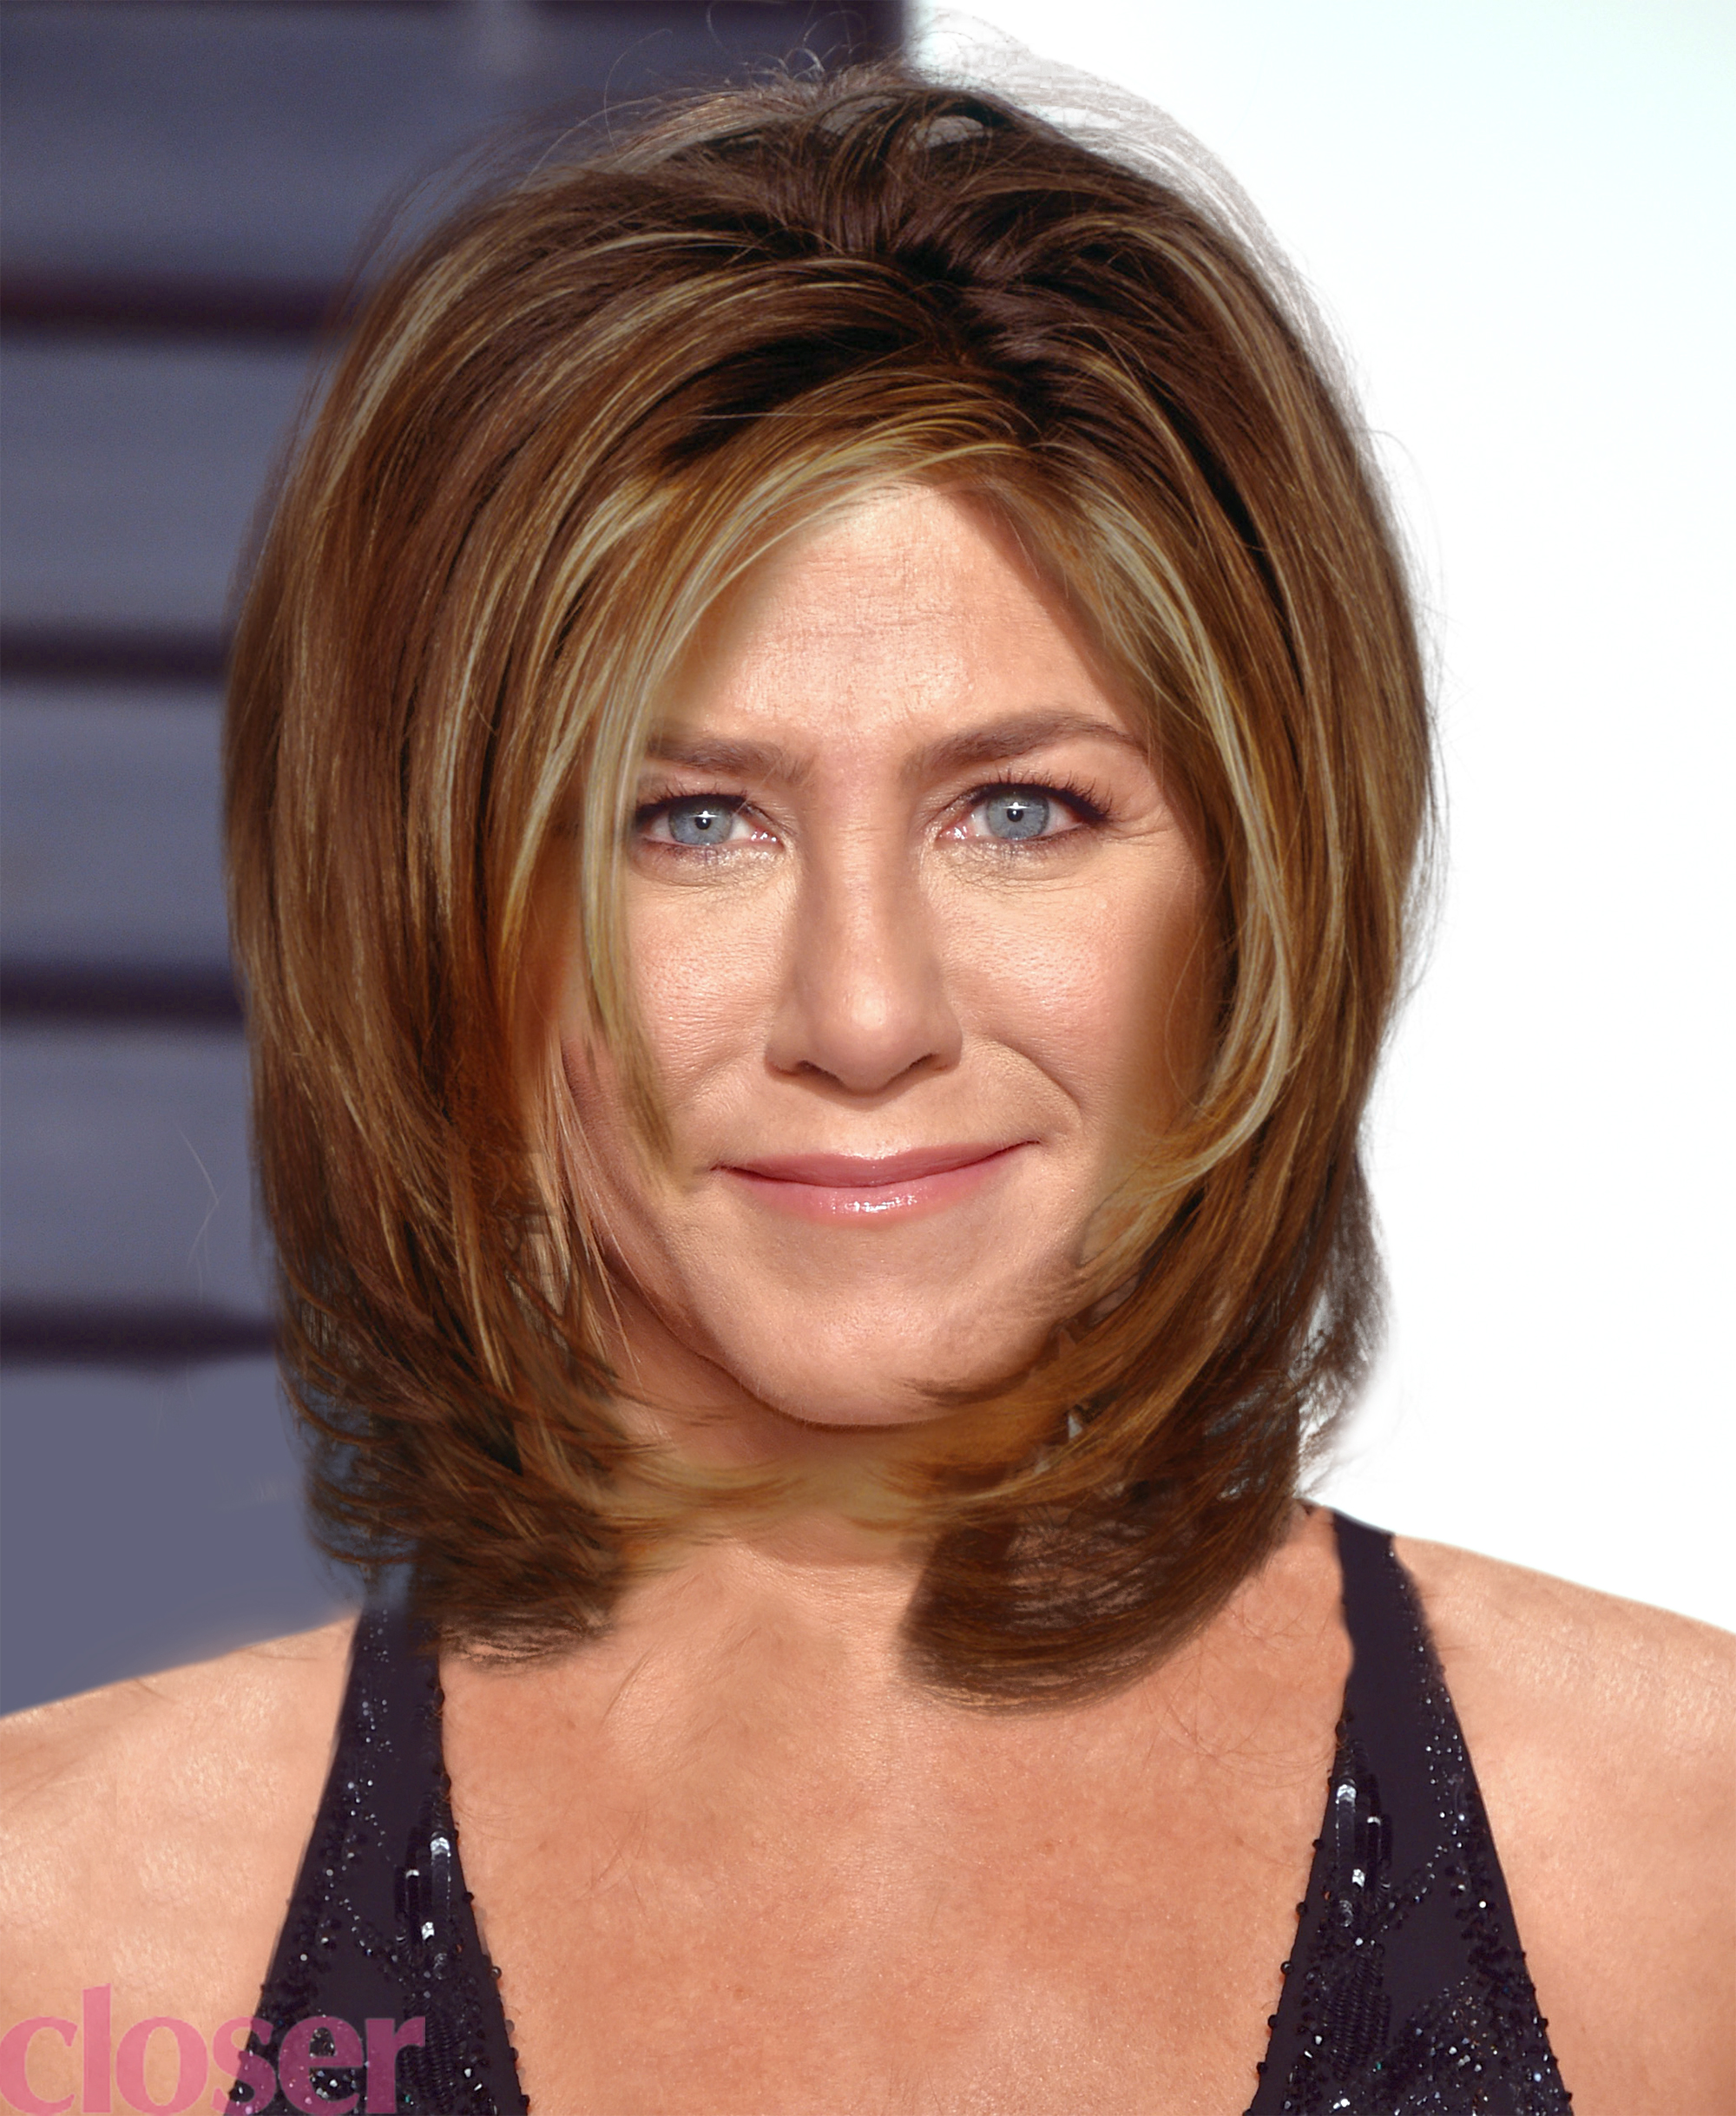 Jennifer Aniston Haircut With Bangs - Haircuts you'll be asking for in 2020